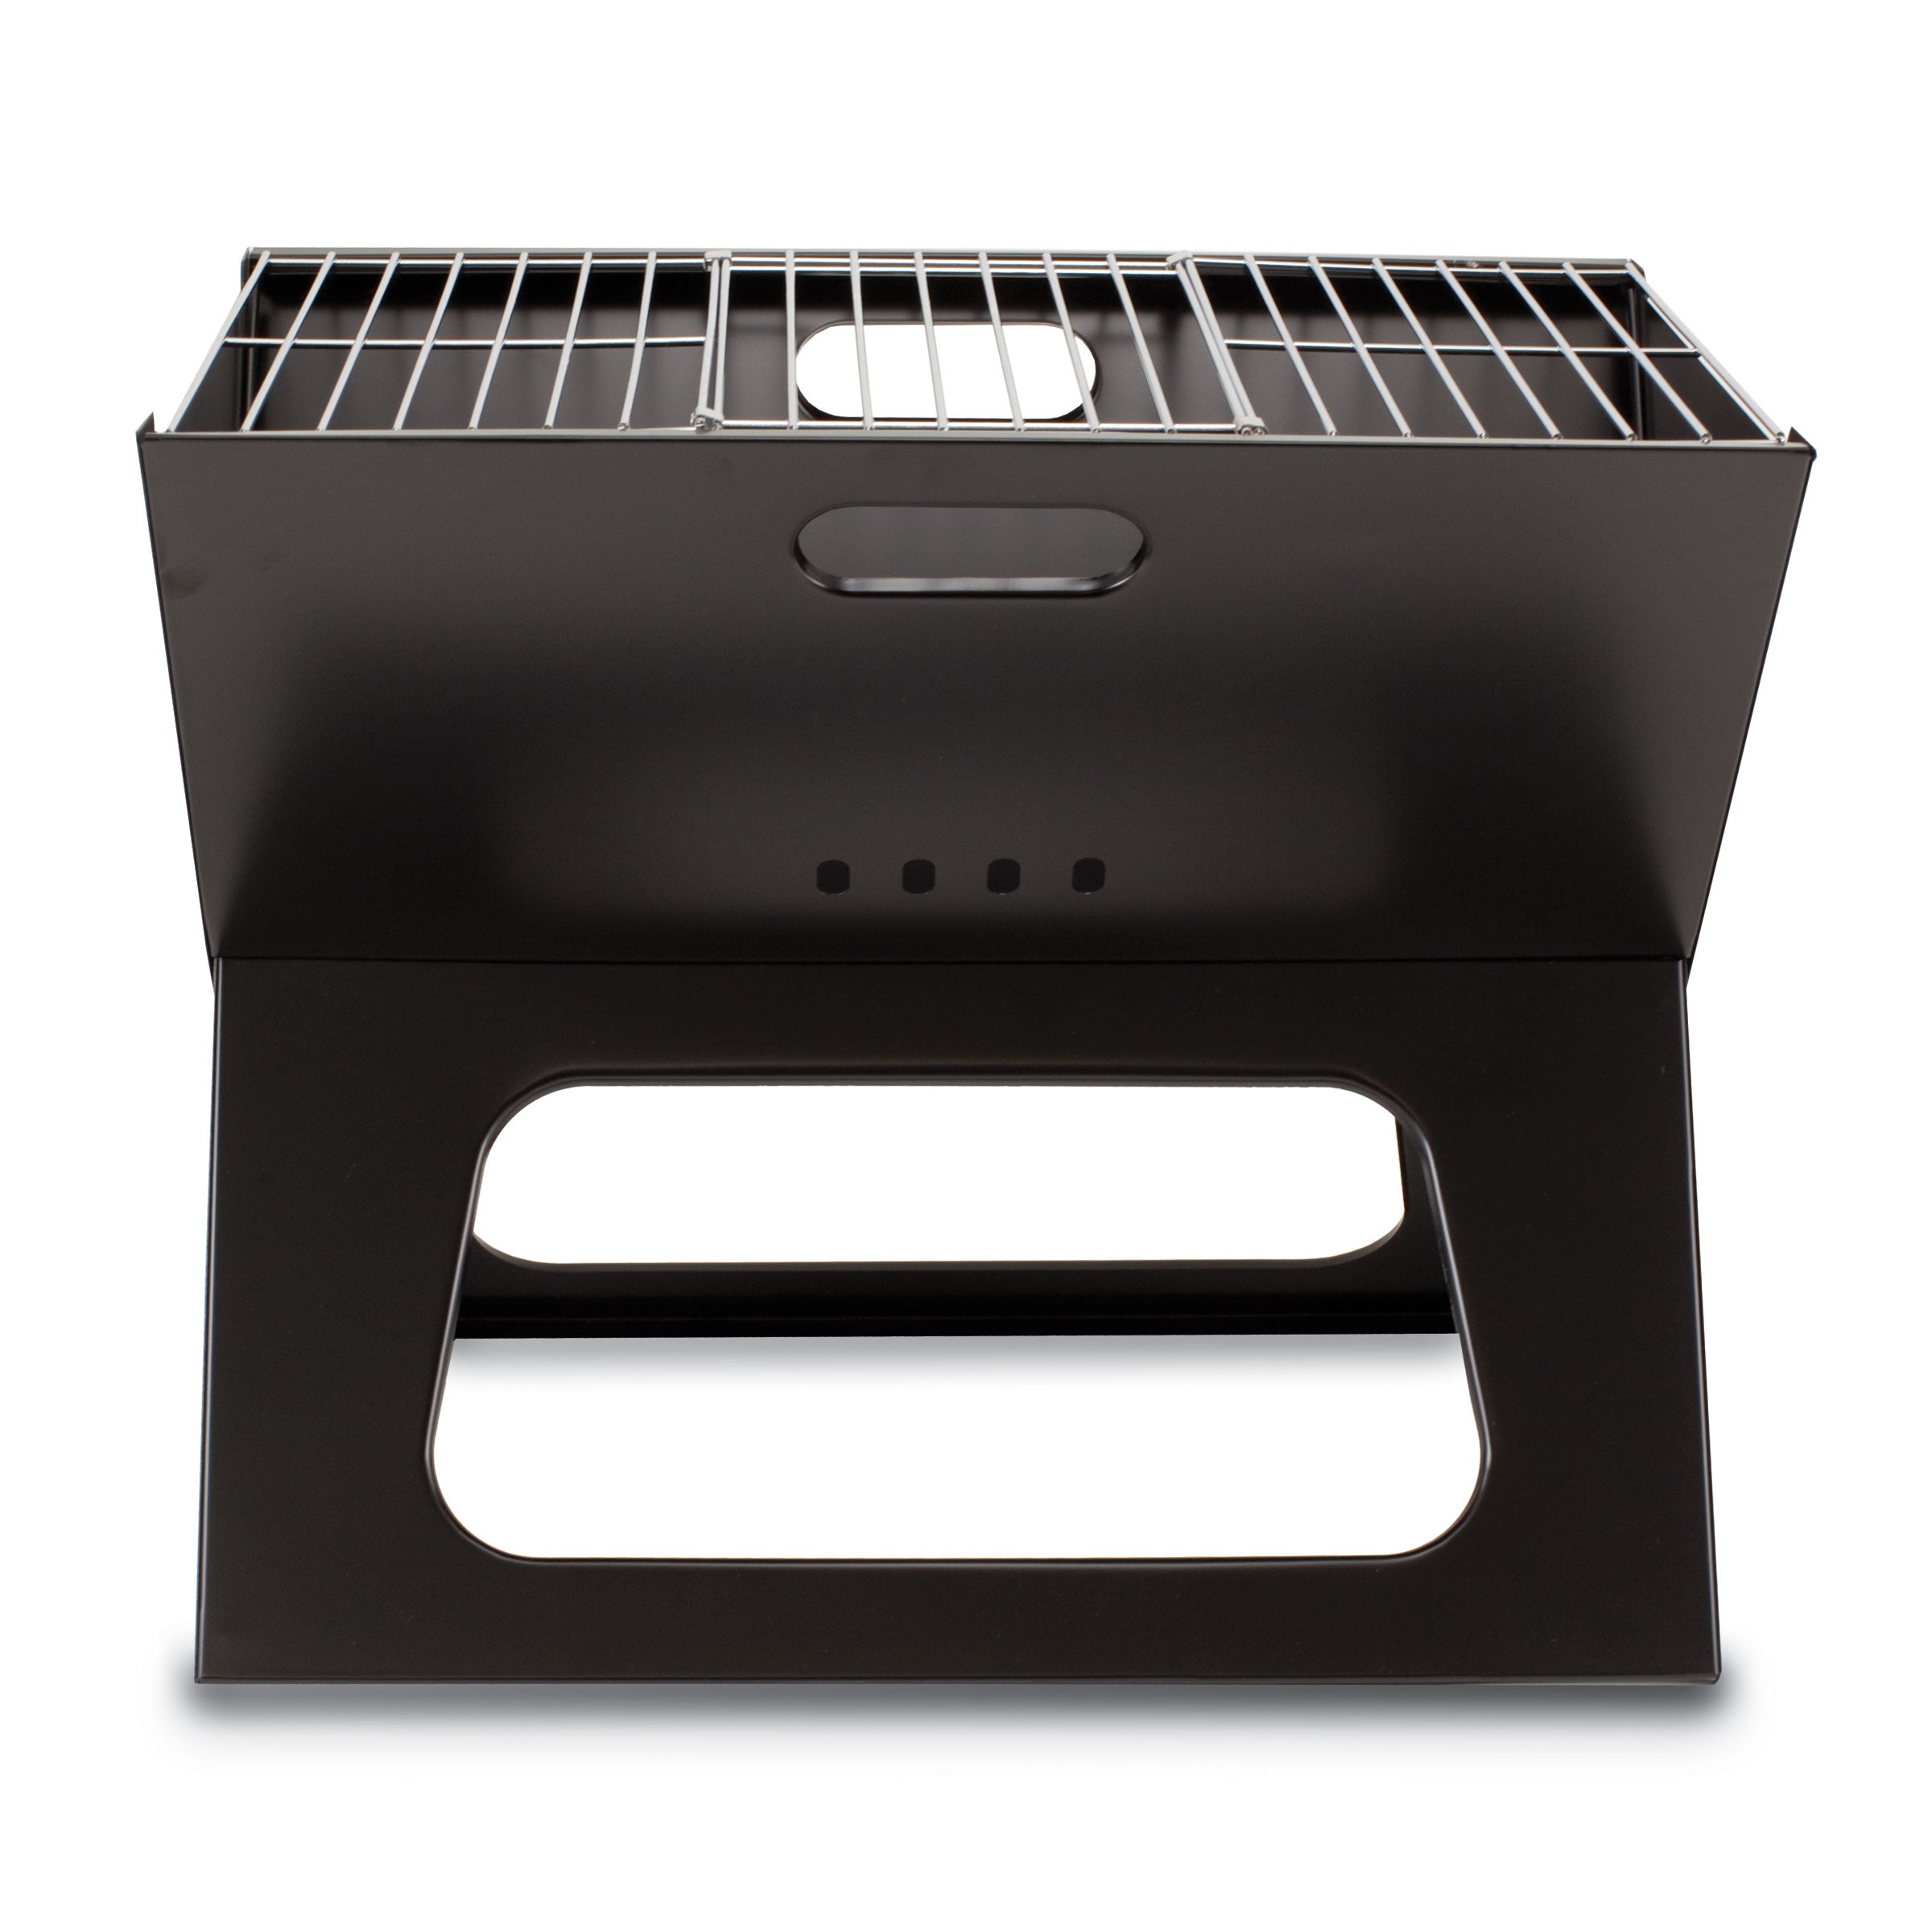 Mississippi State Bulldogs - X-Grill Portable Charcoal BBQ Grill